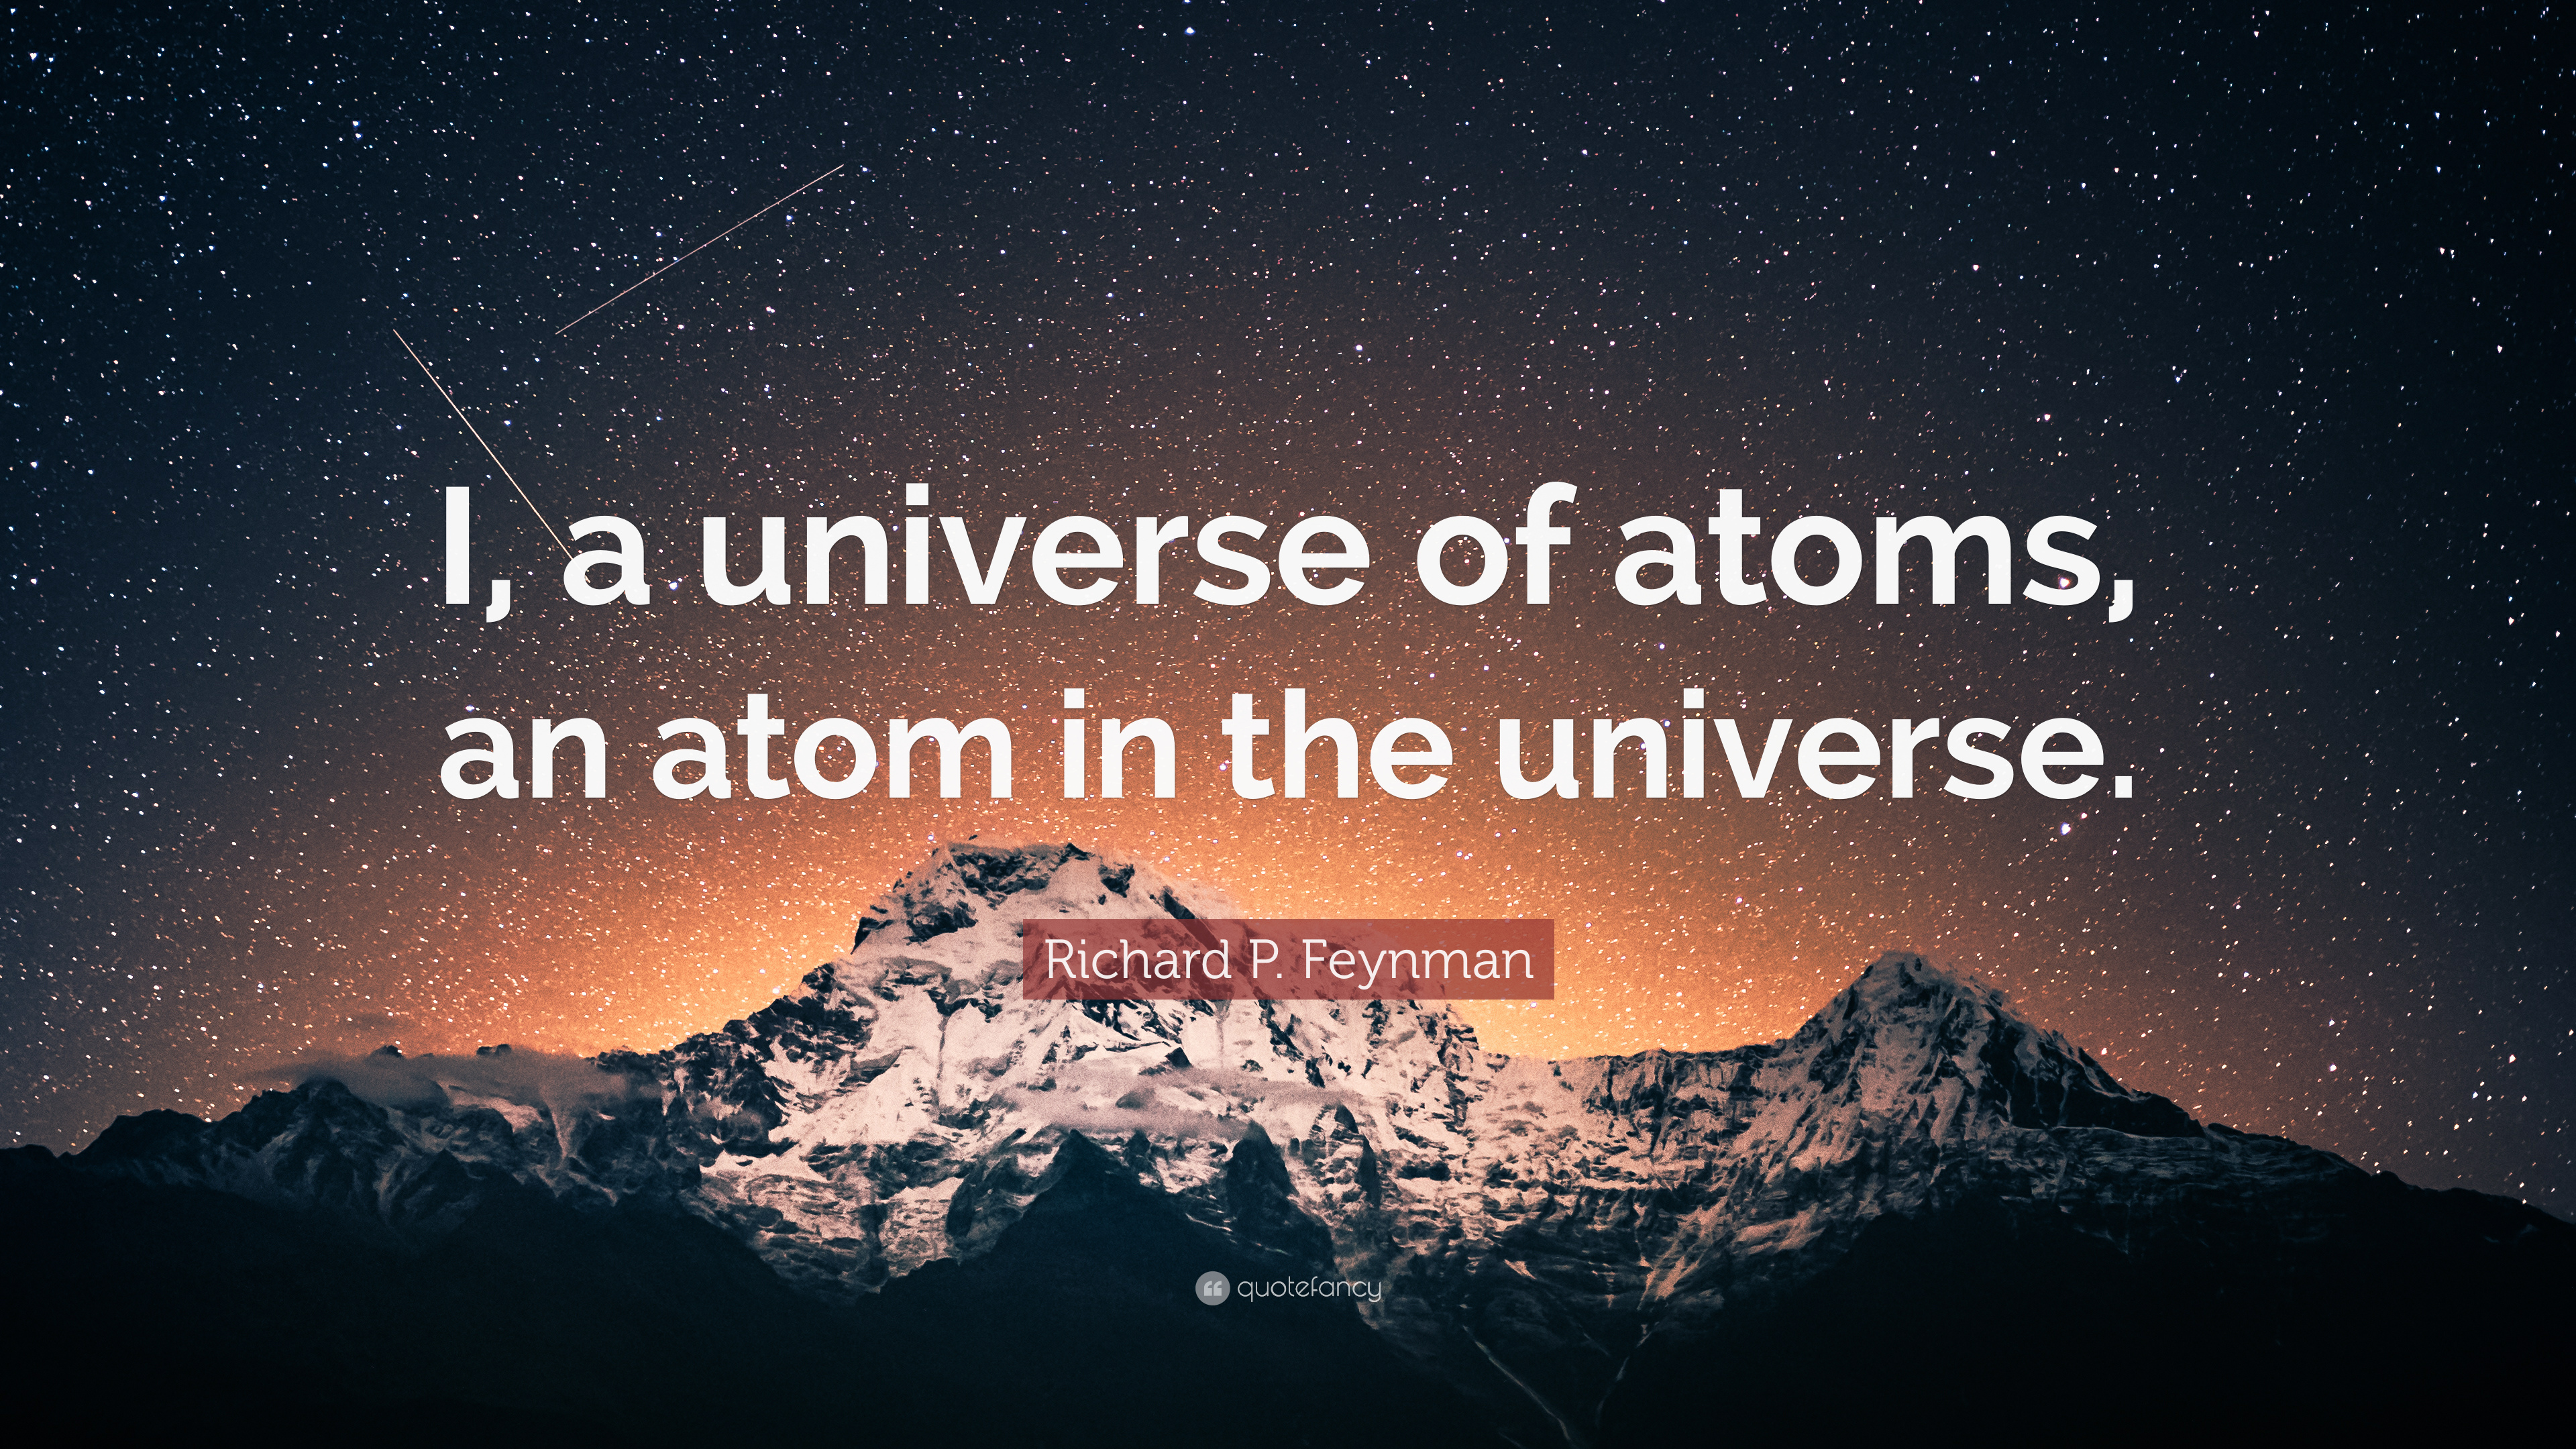 The Univers in an Atom